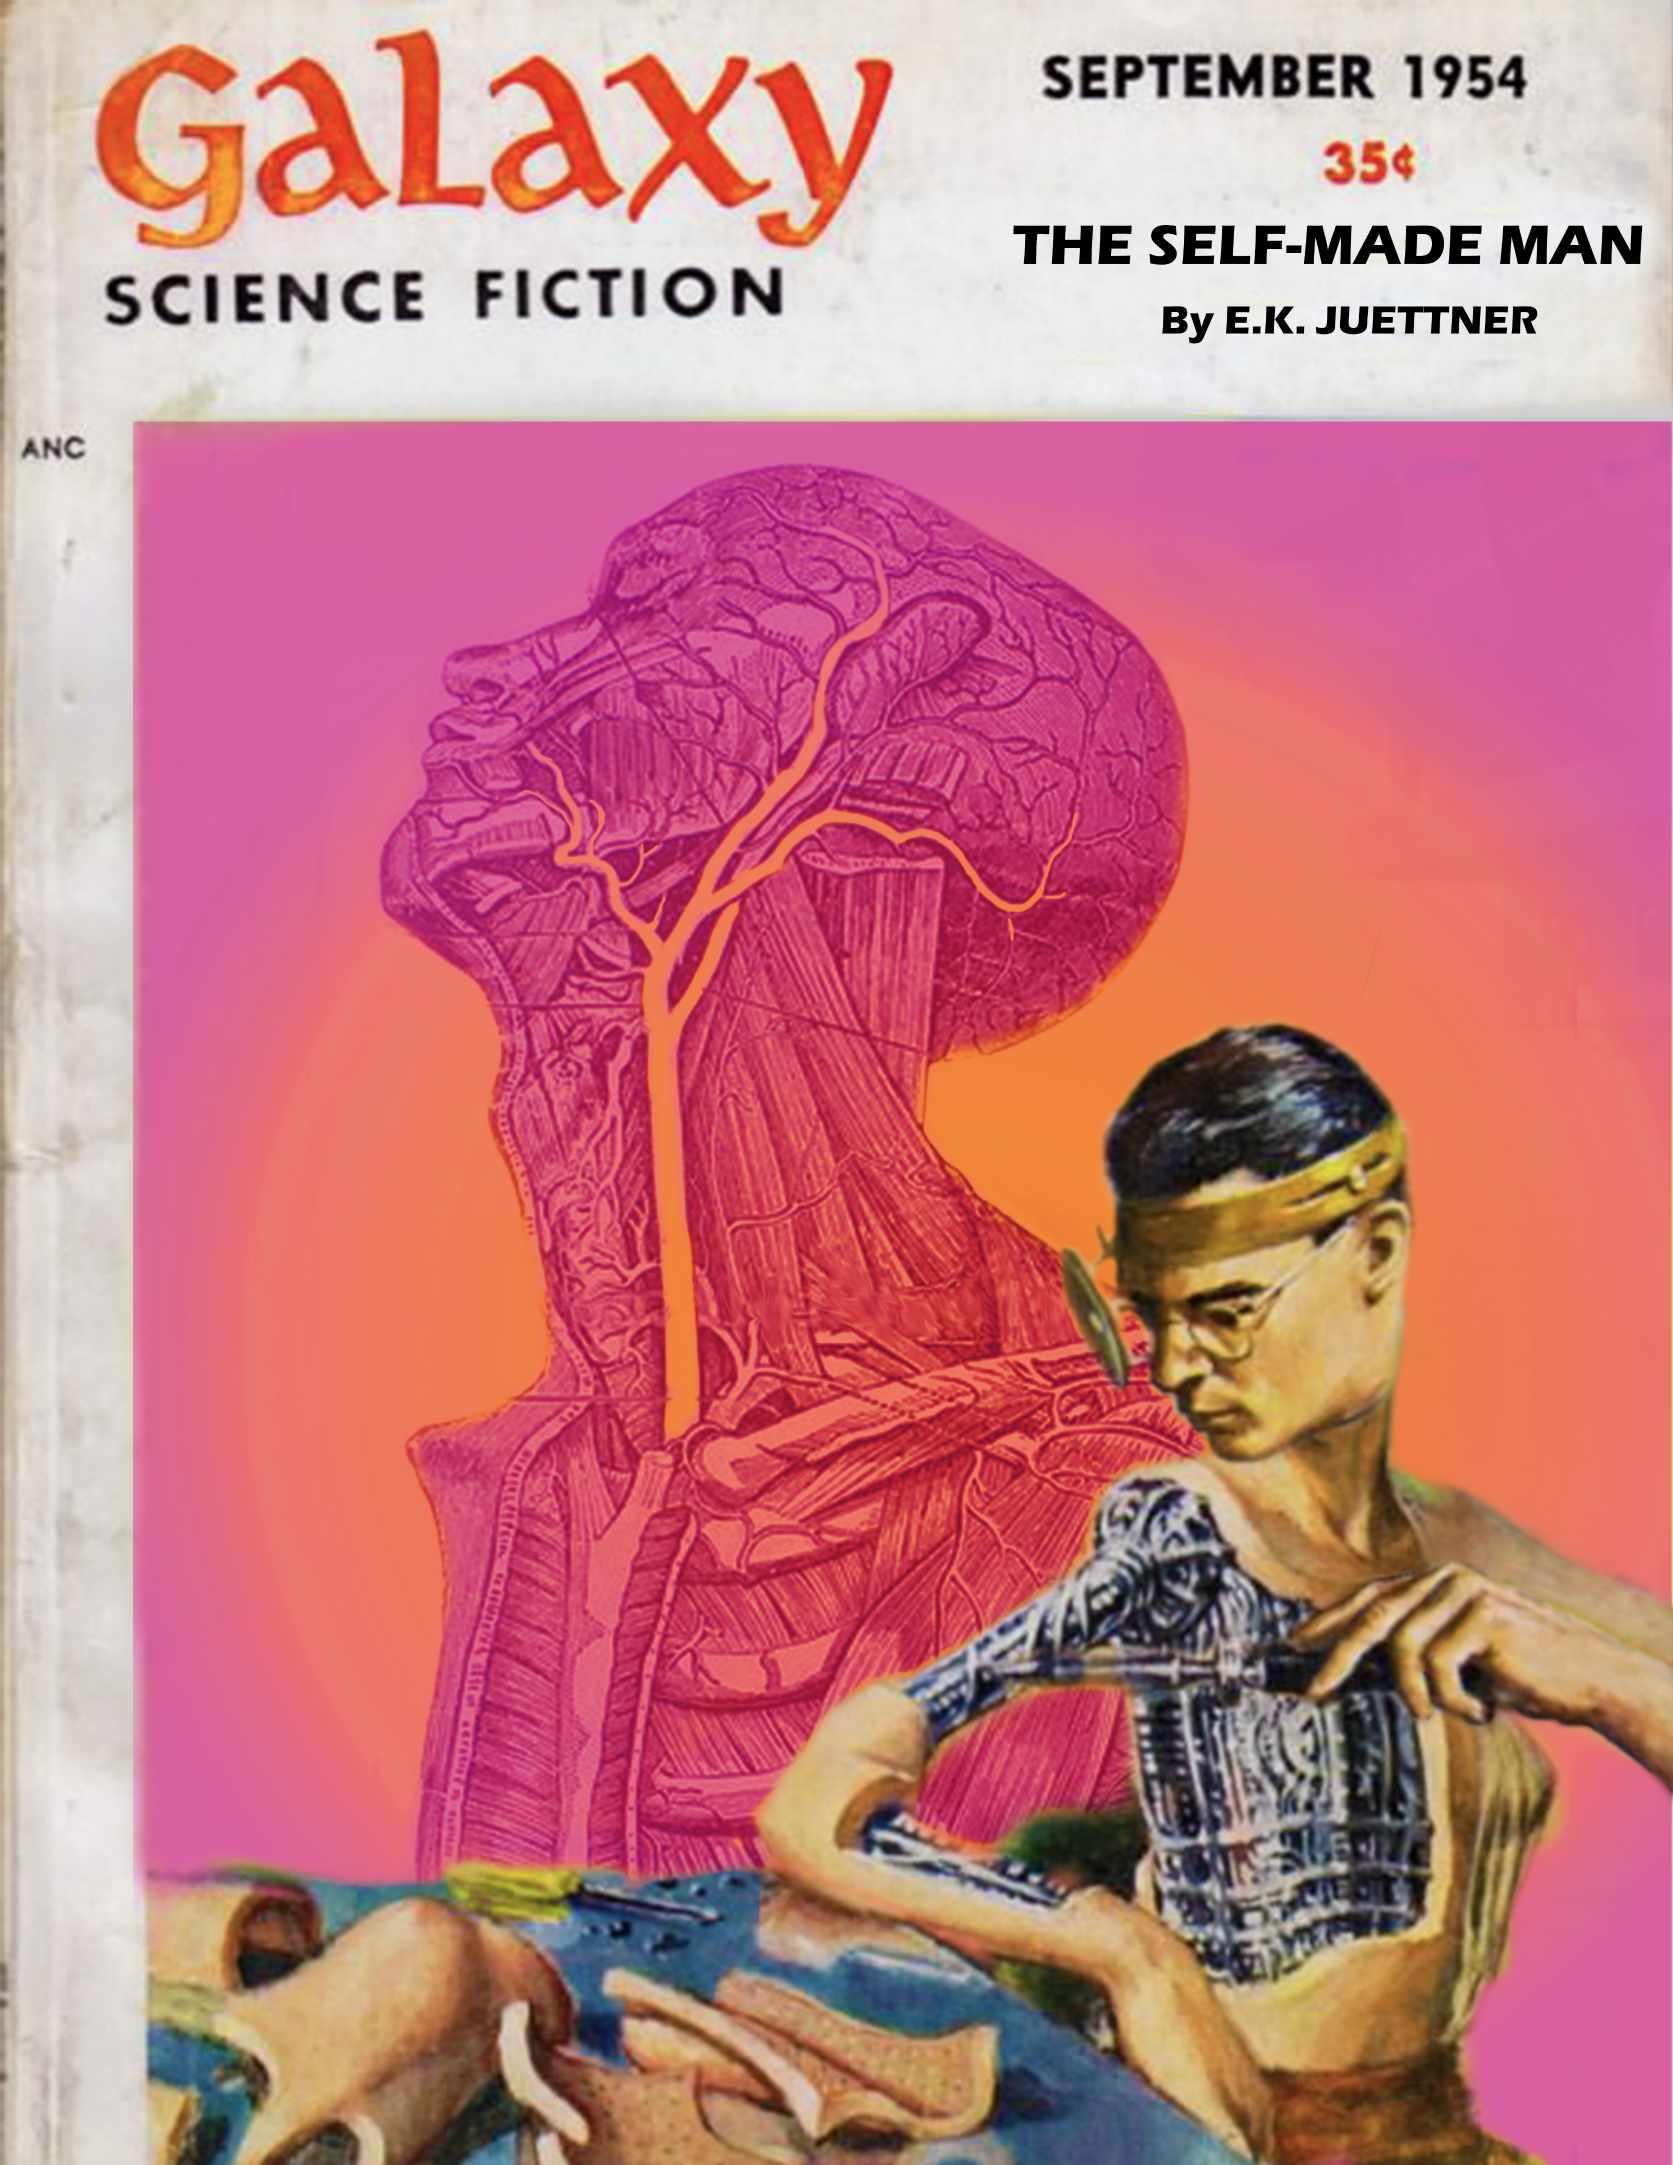 a collage resembling a pulp sci-fi cover. The text reads "Galaxy Science Fiction, September 1954, 35¢, The Self-Made Man by E.K. Juettner". There's a scientist who has removed one of his breasts to reveal circuitry and machinery underneath. In the background is an anatomical drawing in shades of orange and pink with nerves that look a bit like a tree